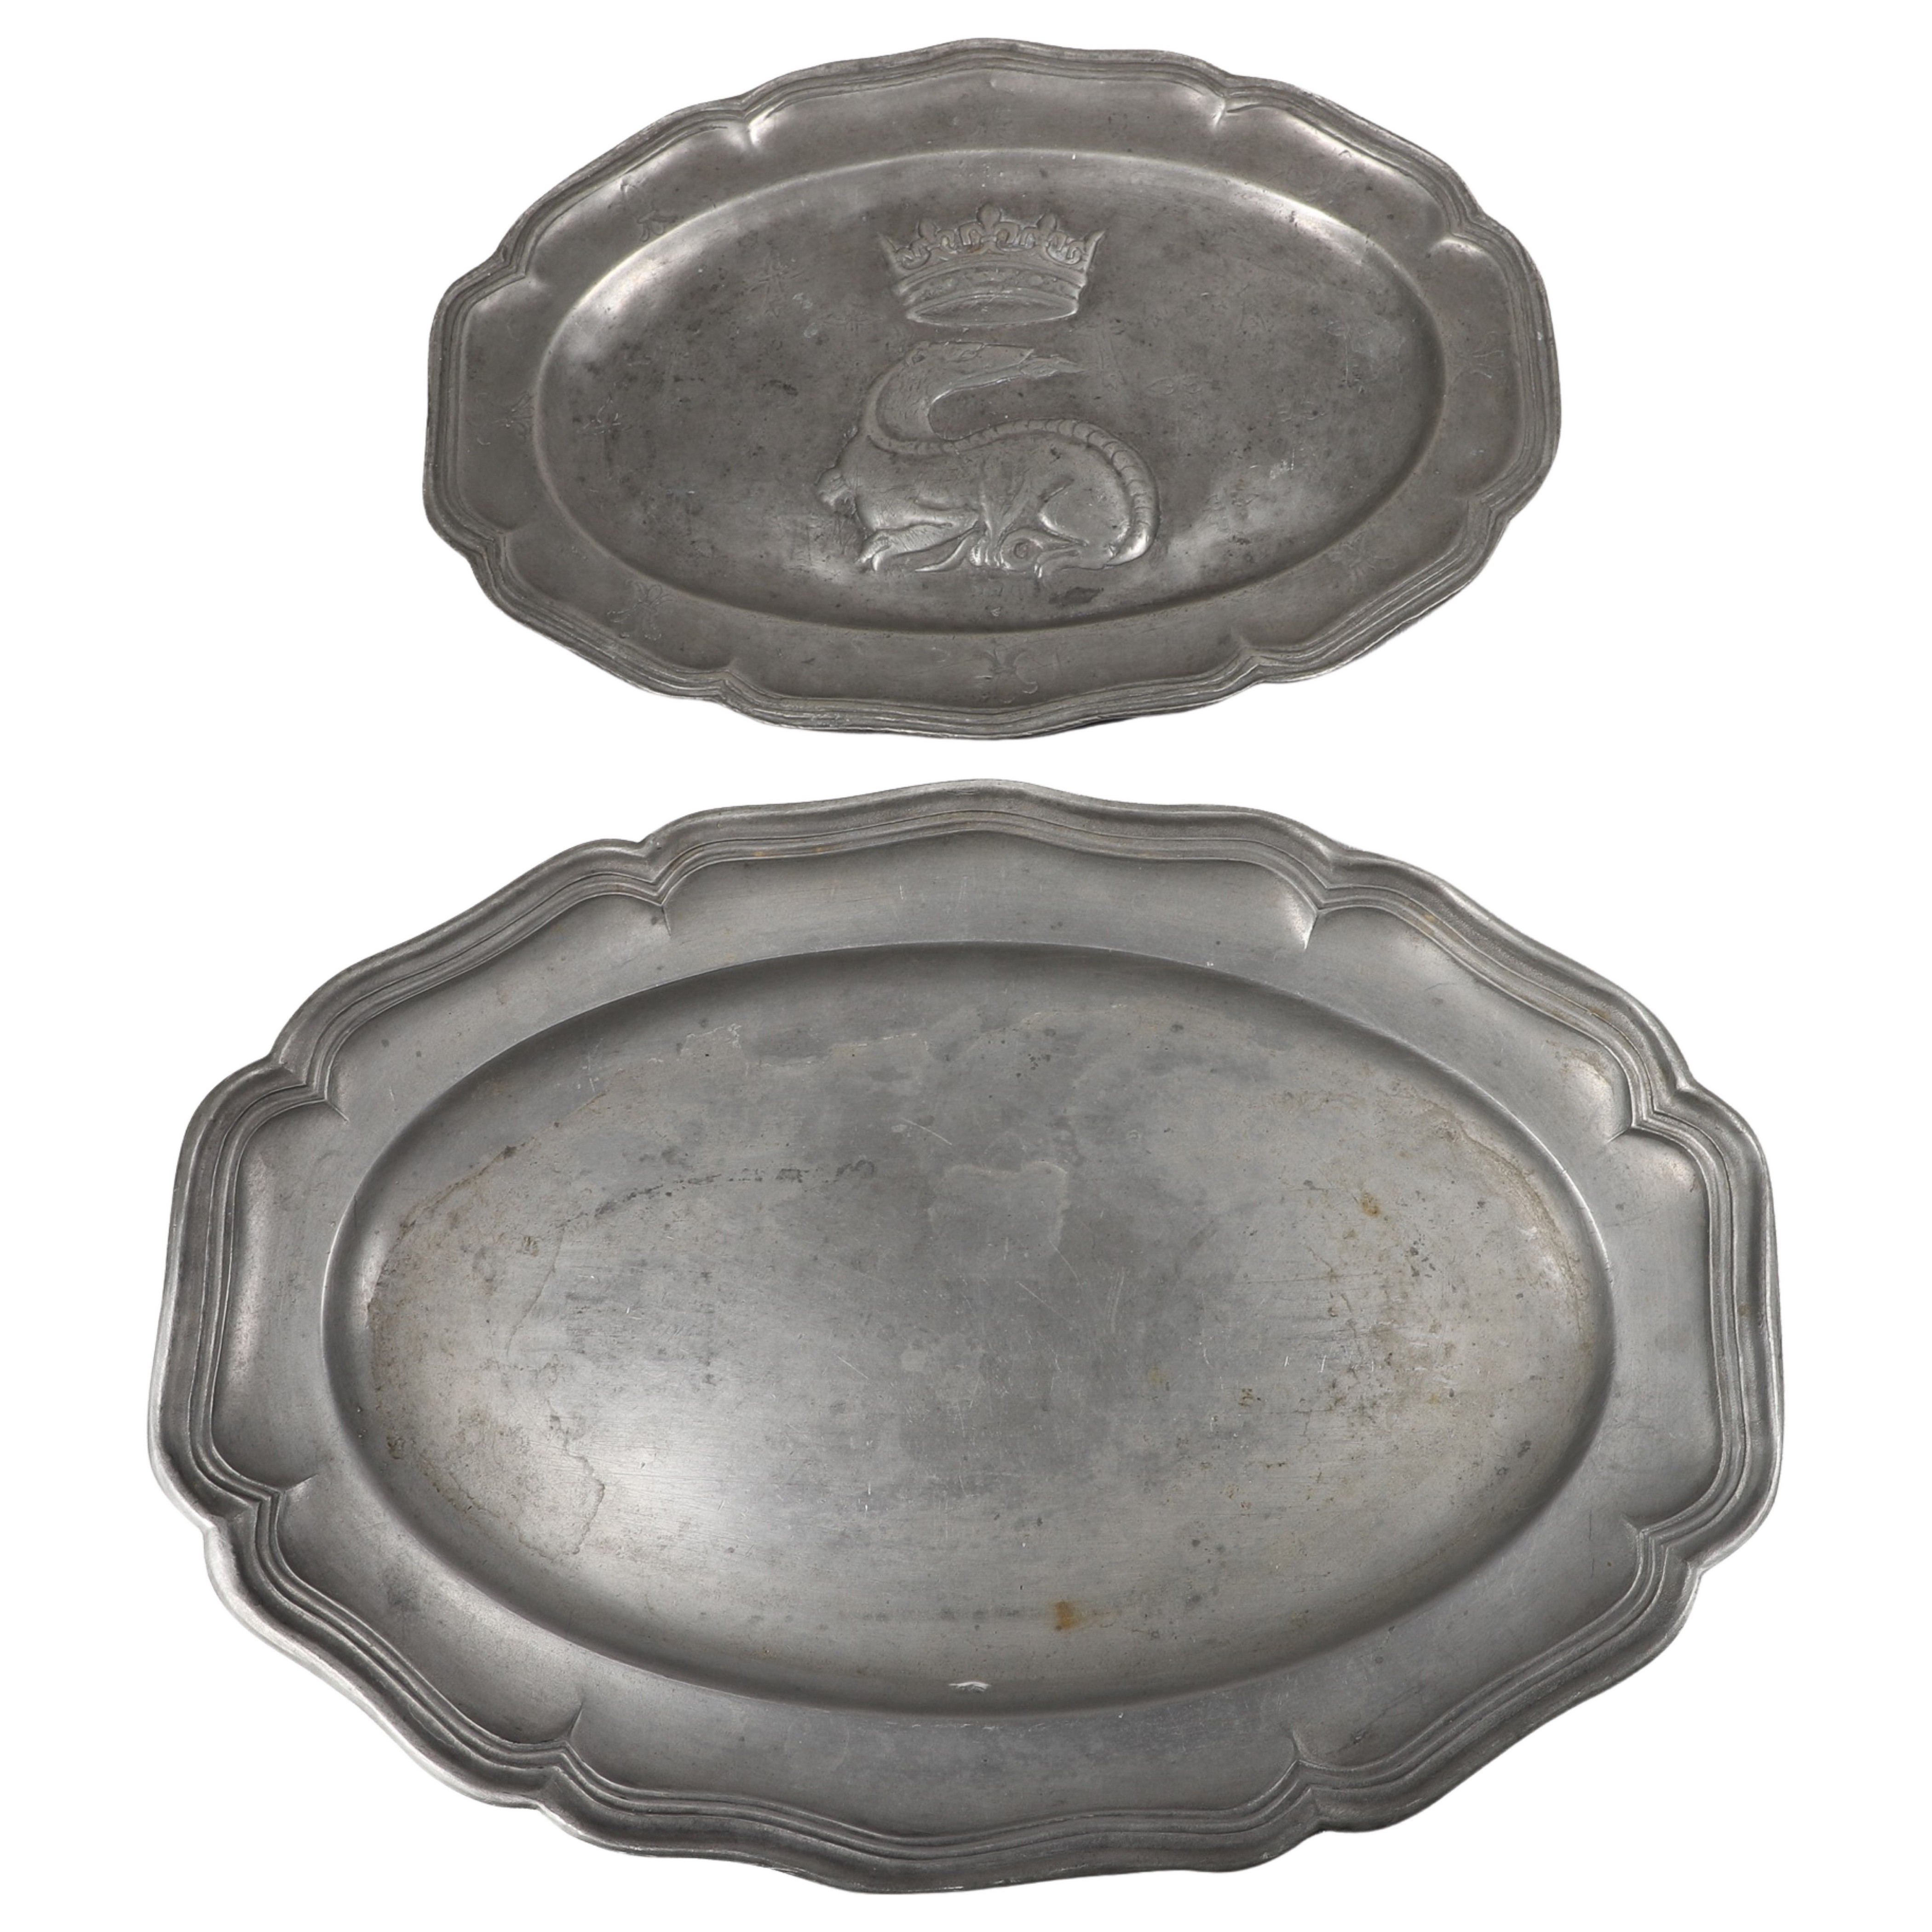 (2) 18th C pewter trays, each marked